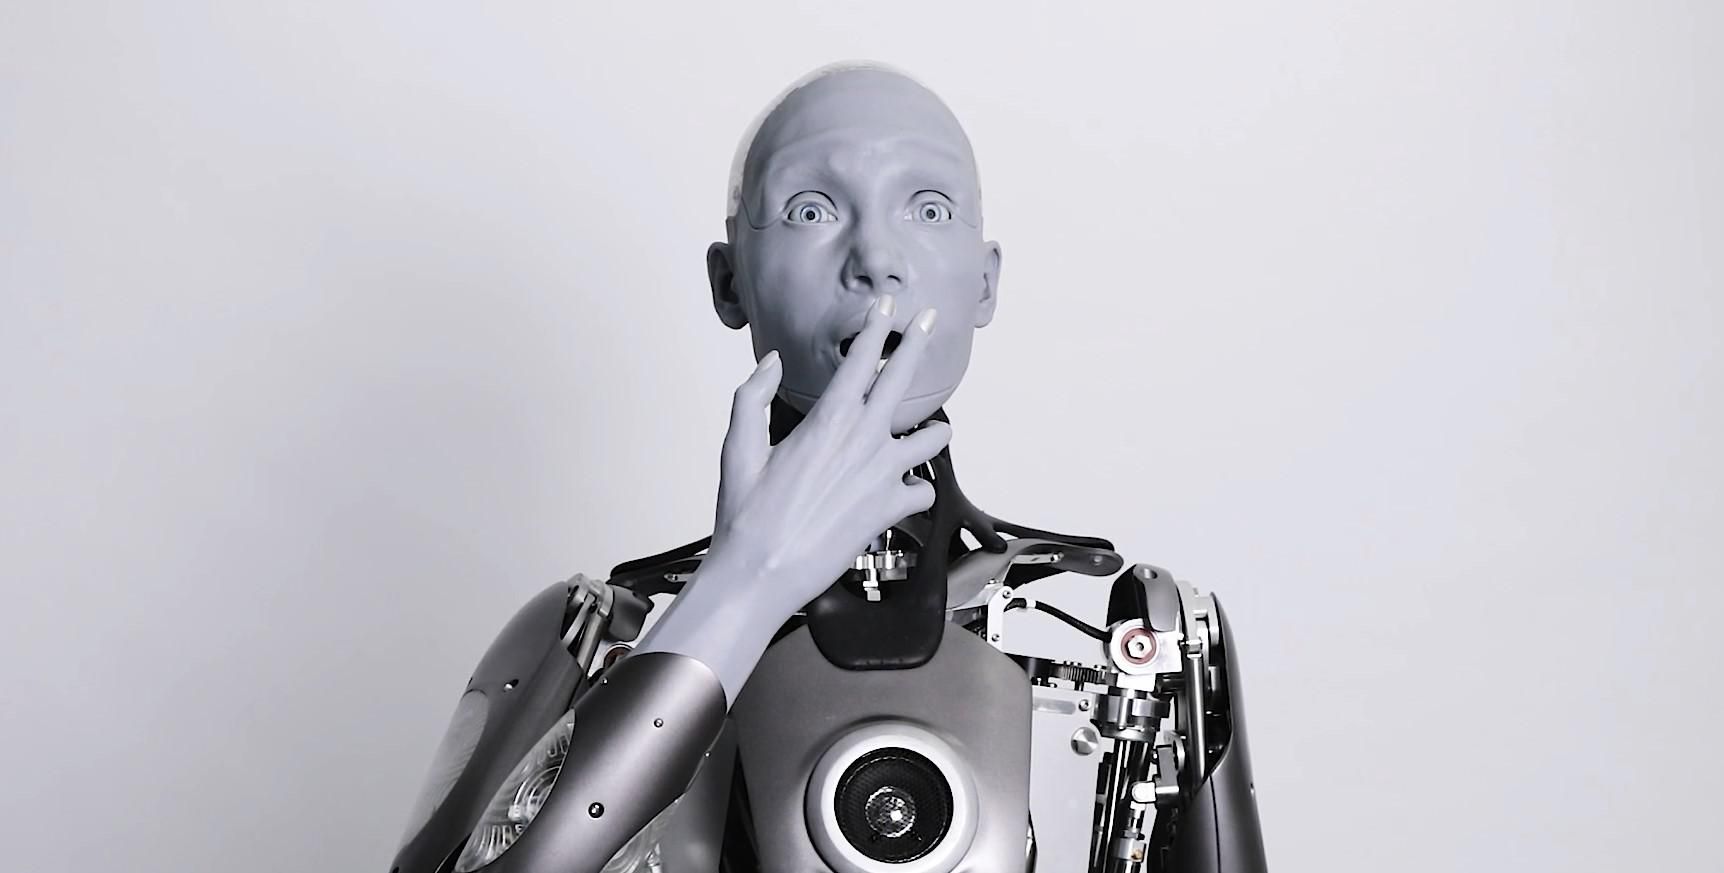 A gray anthropomorphic humanoid robot making an expression of surprise